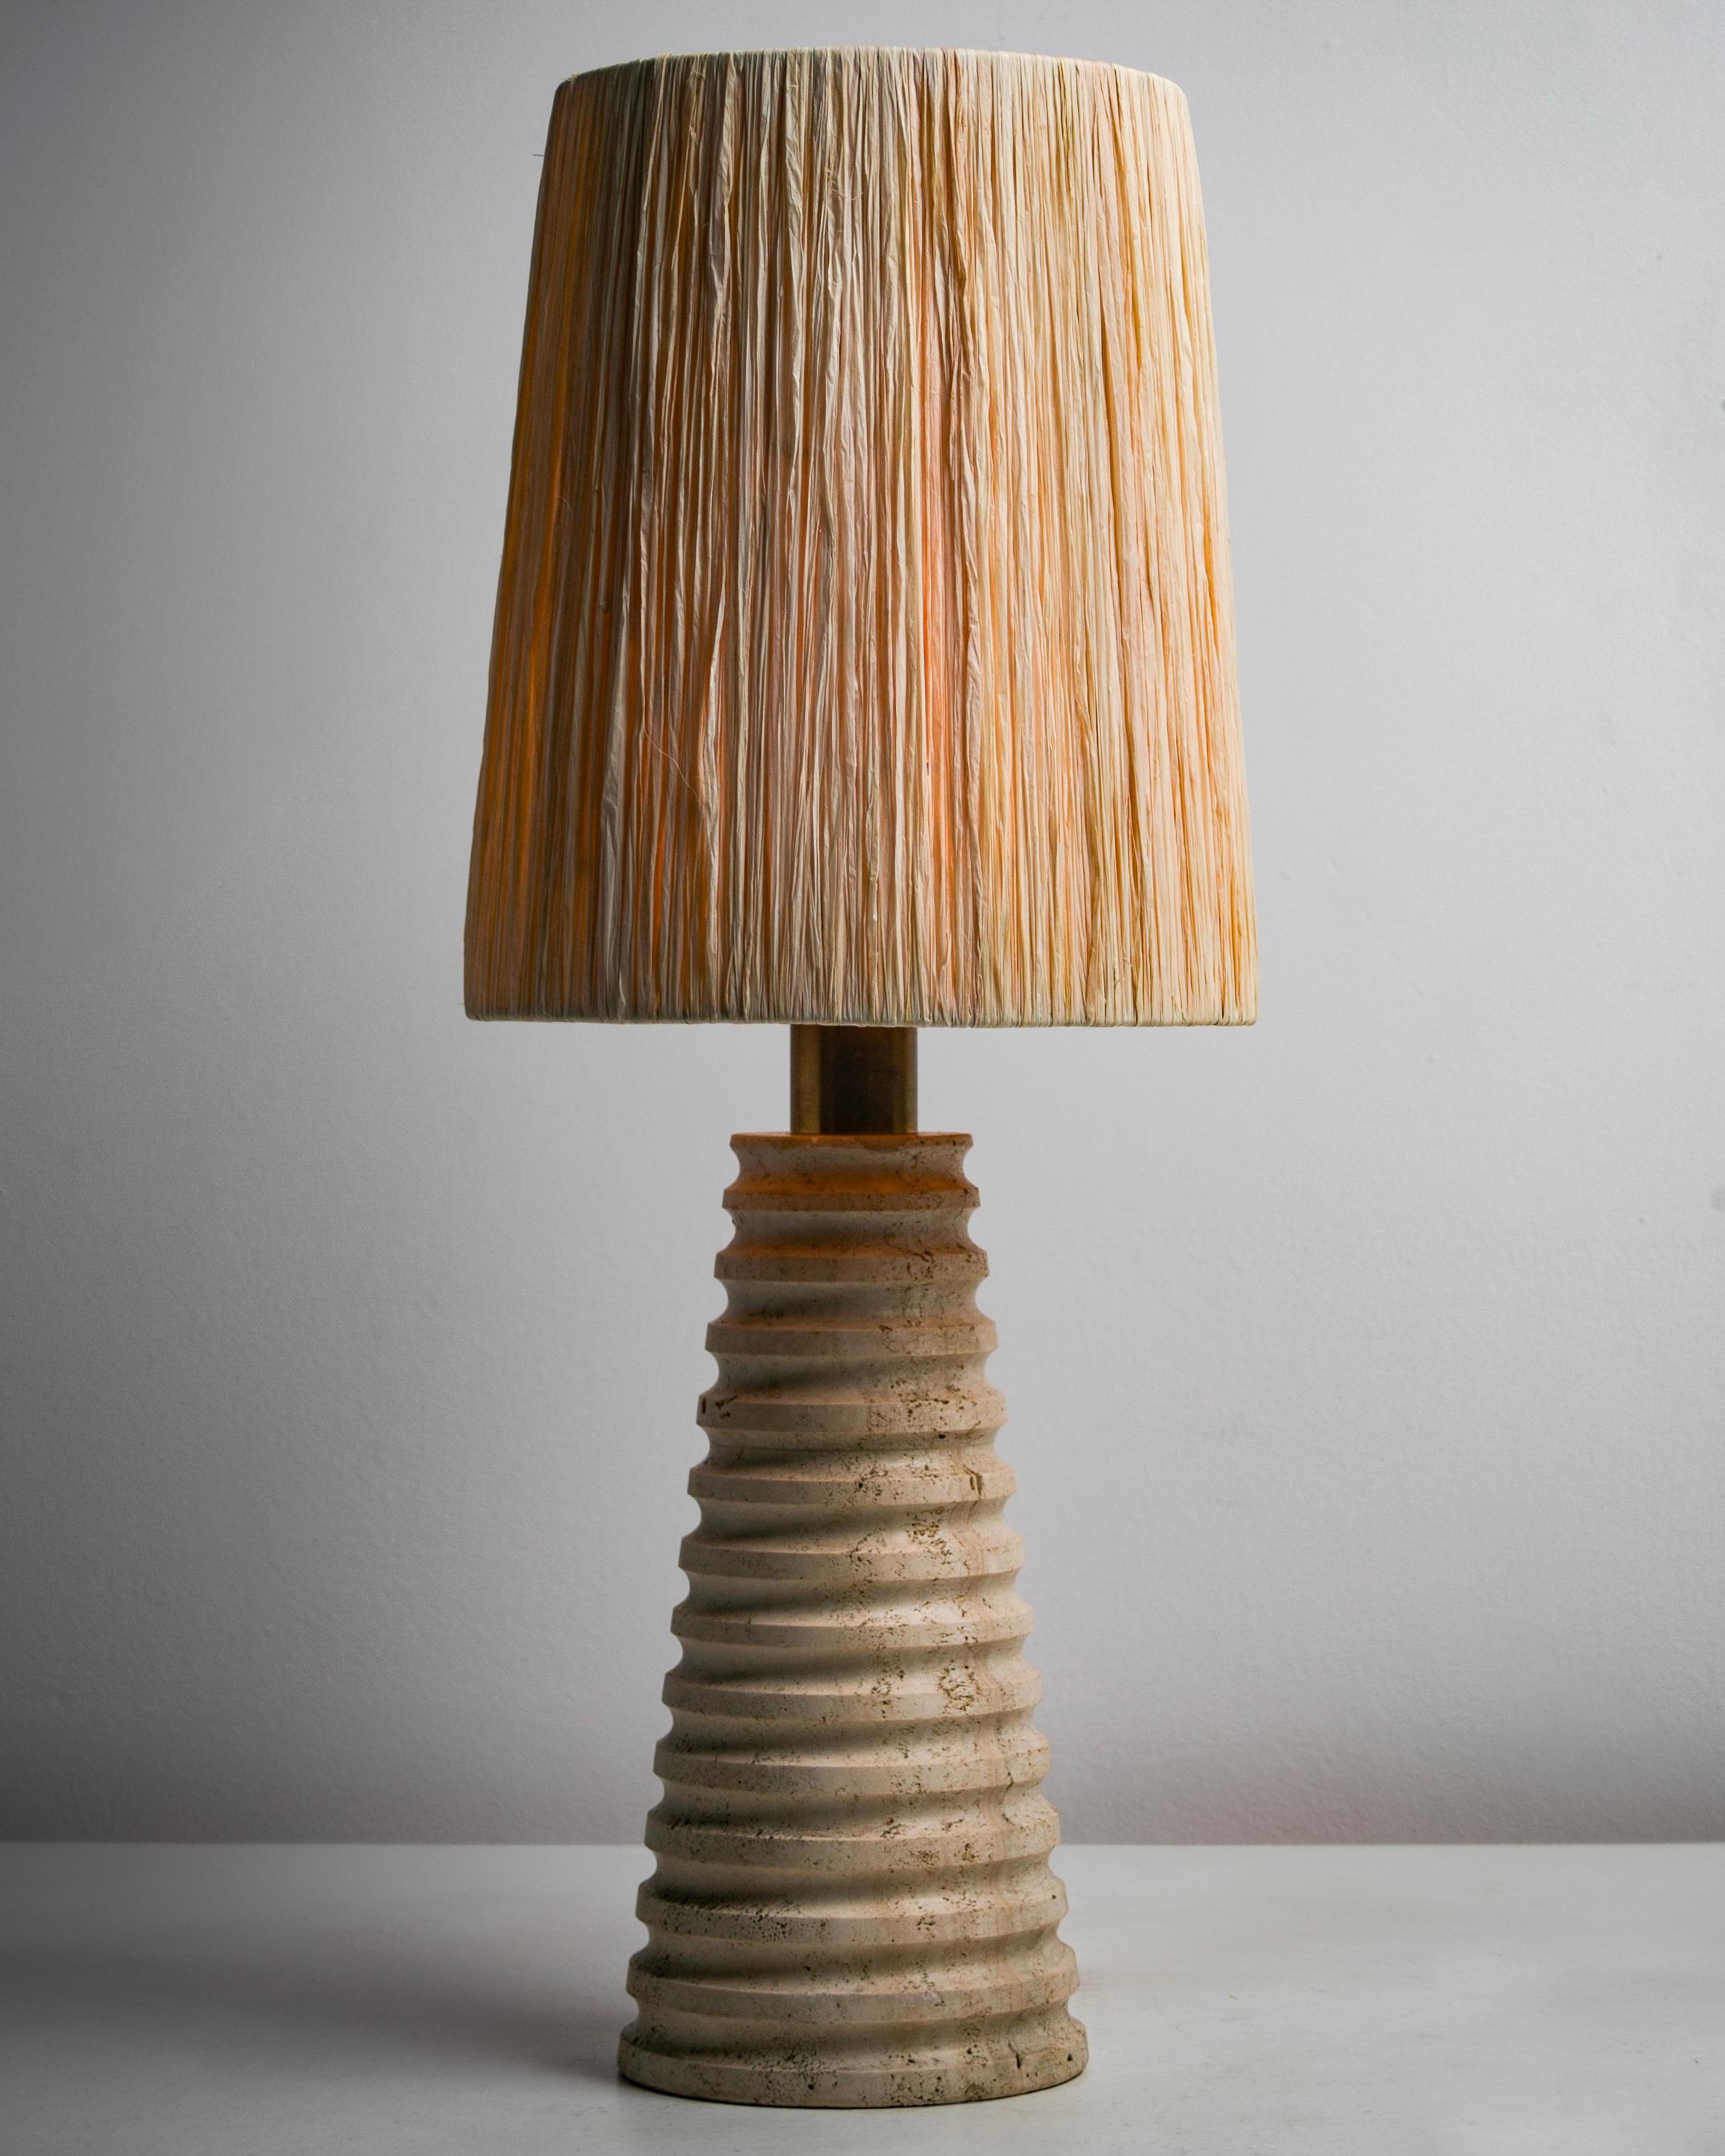 Italian carved travertine table lamp. Designed and manufactured in Italy, circa the 1970s. Tapered cylindrical base, carved in an upward spiral form. The shade is newly fabricated raffia. the lamp holds a single E27 socket type, adapted for the US.